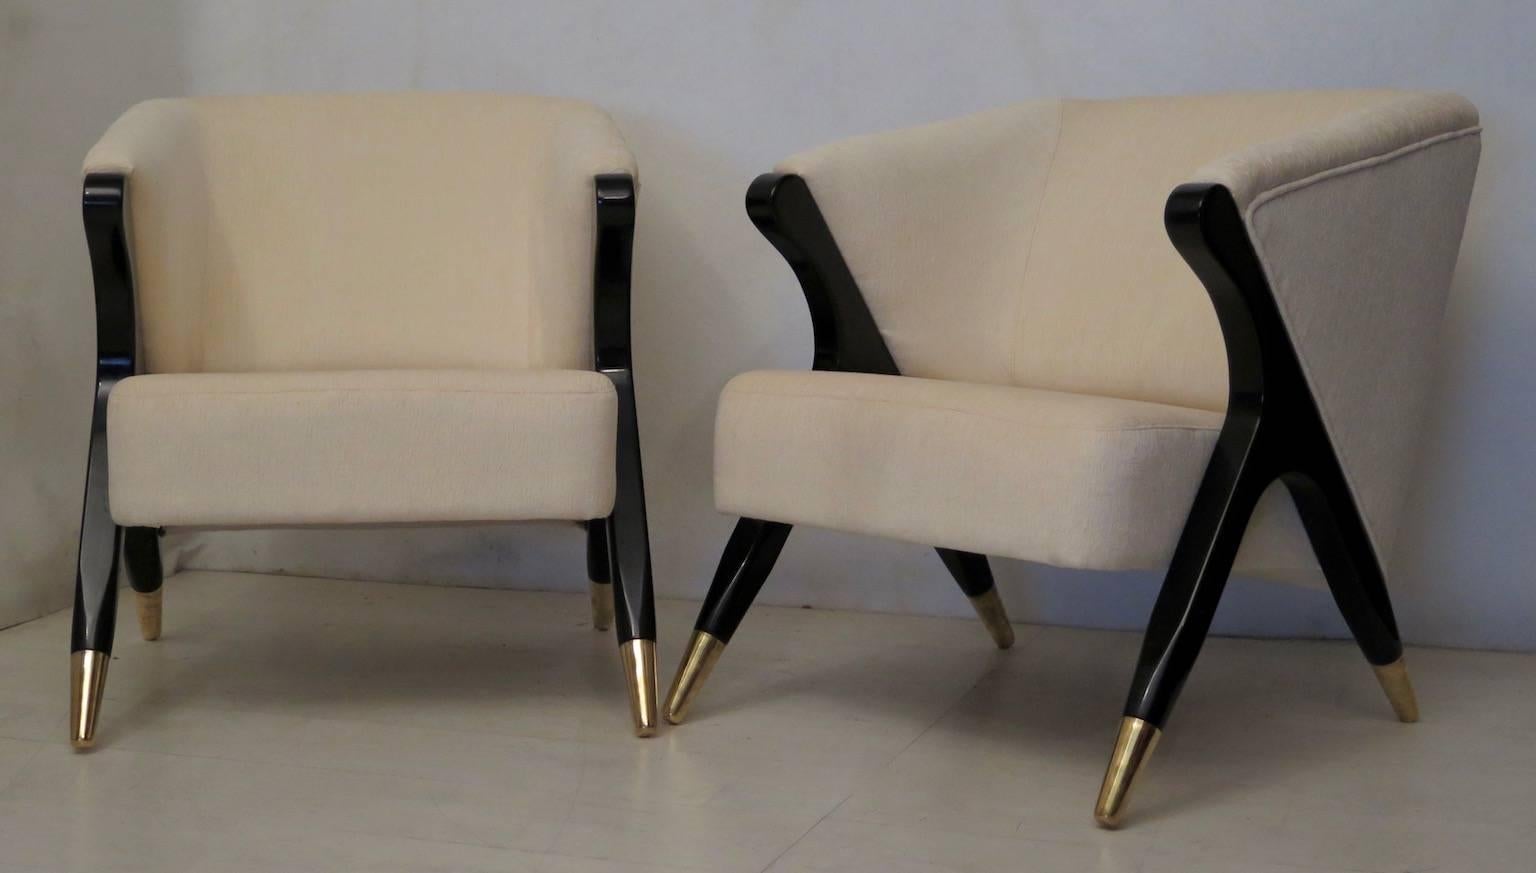 Pair of Art Deco armchairs, covered in white fabric, with black lacquered legs. The feet are made of brass. Particular their shape of an inverted Y.
Comfortable armchairs gathered and enveloping. Beautiful for a living room, or as office chairs.
 